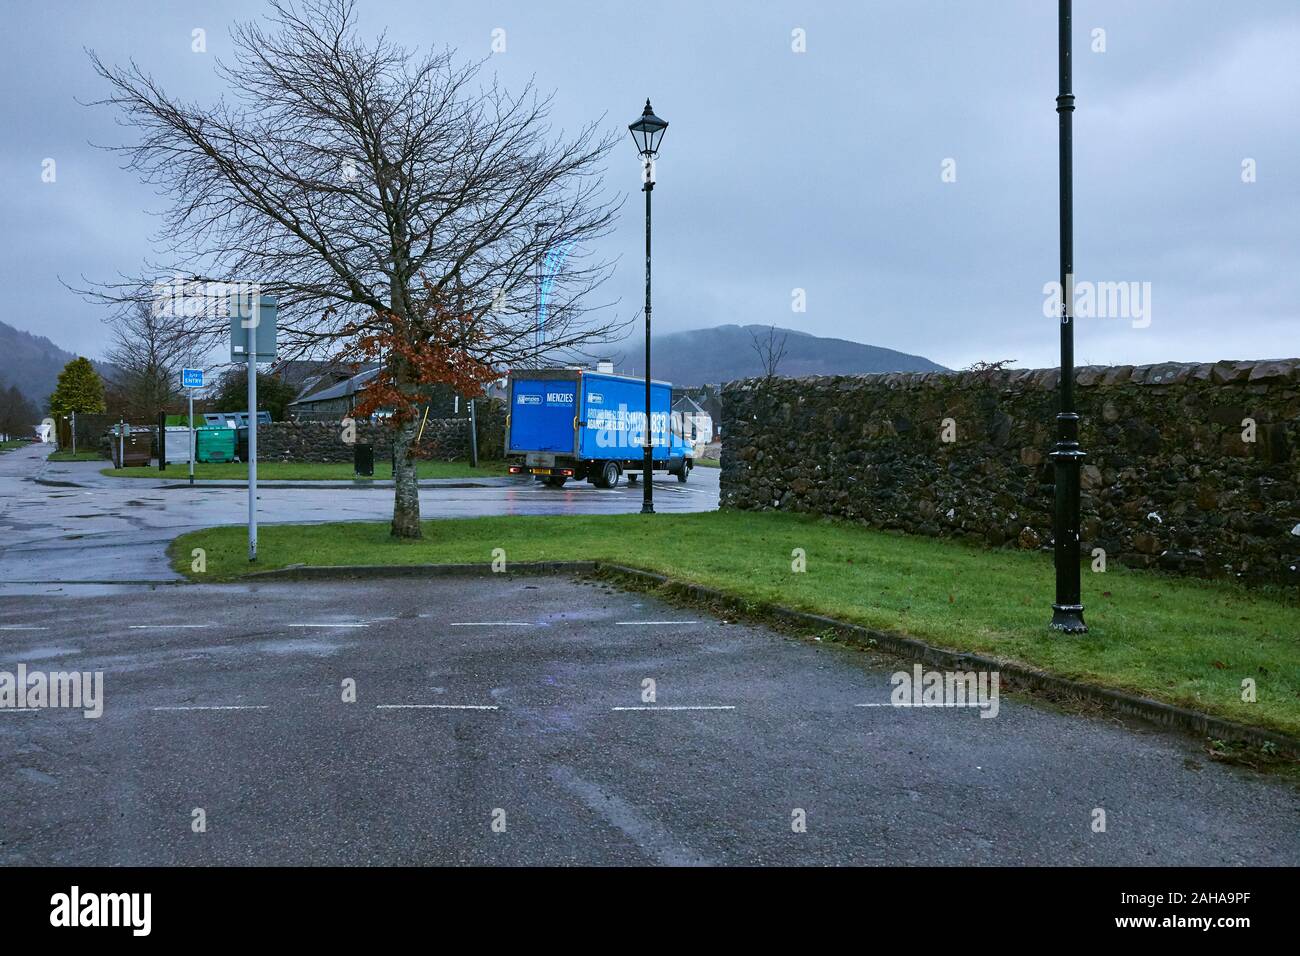 A goods delivery lorry leaves the main car park at Inveraray on a late, gloomy winter afternoon. 16/12/19 Stock Photo